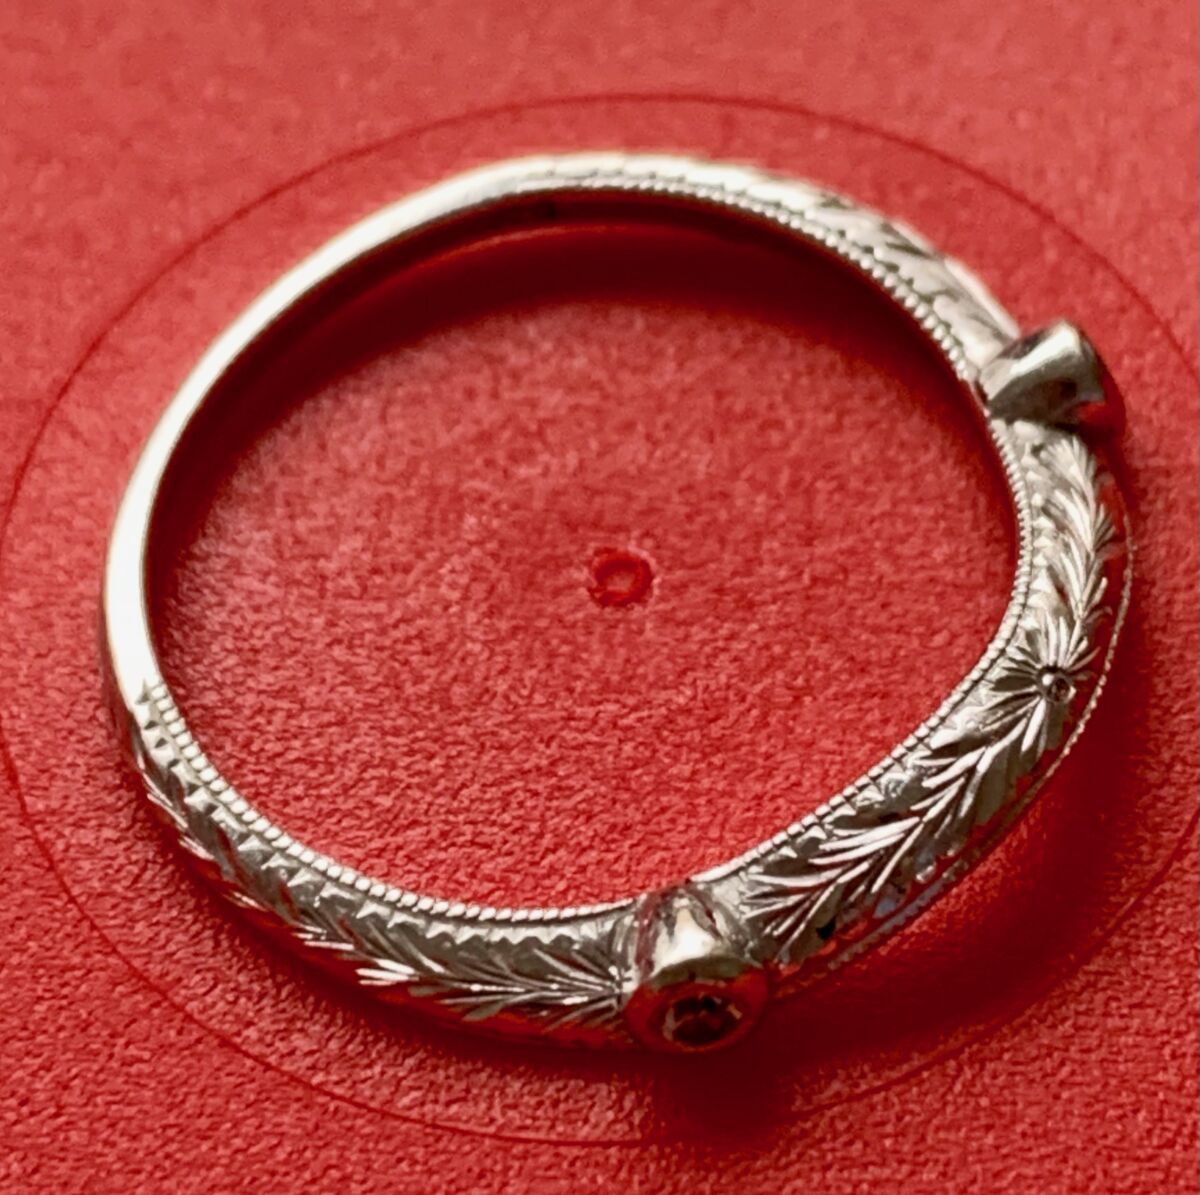 If this ring guard and its accompanying ring (not shown) belong to you, email plutosquared@icloud.com.